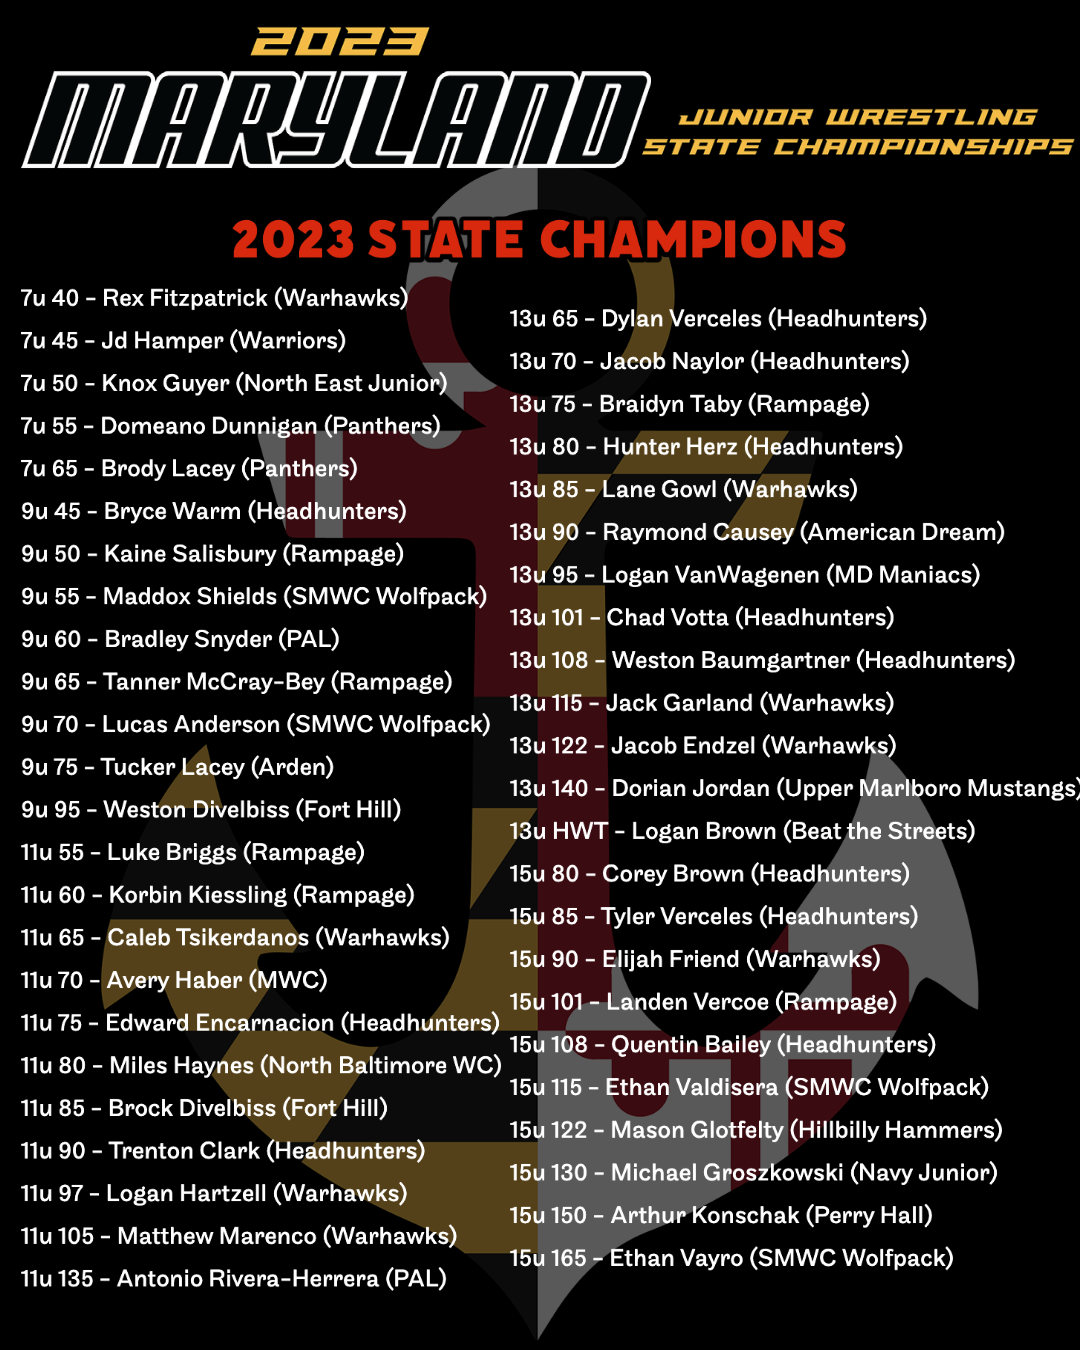 MD jr state champs results-1